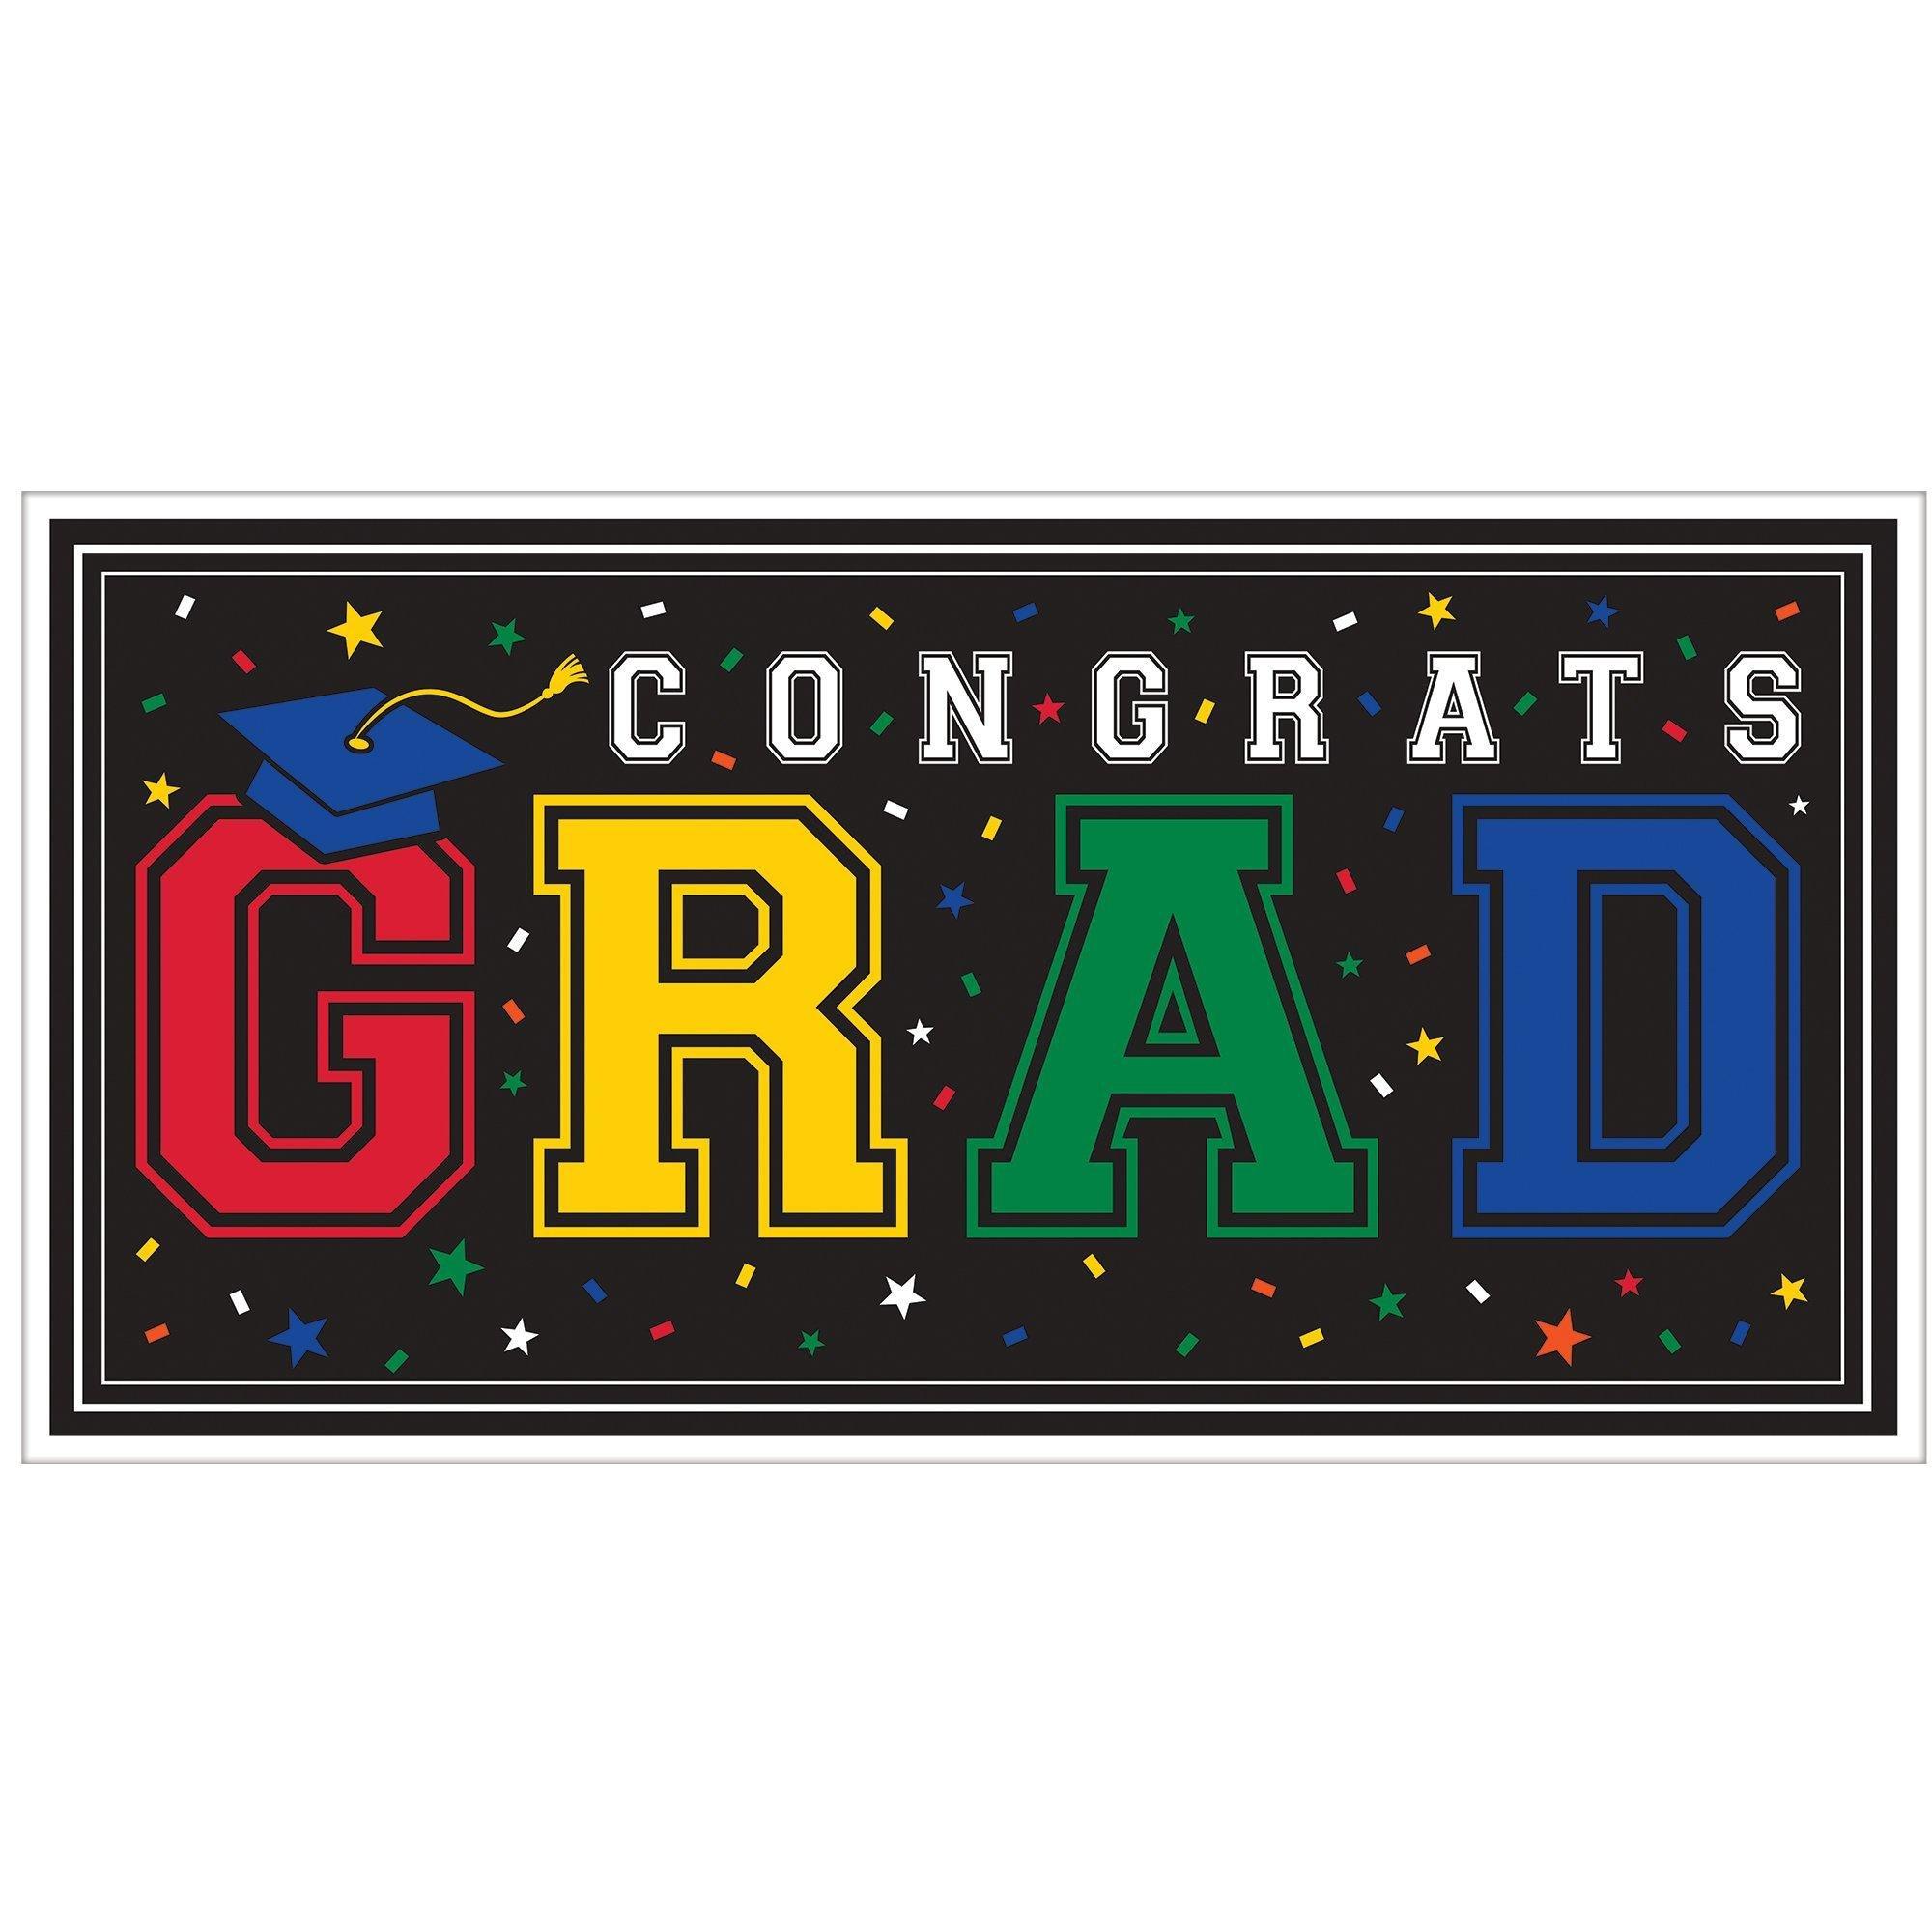 Graduation Party Supplies Kit for 20 with Decorations, Banners, Balloons, Plates, Napkins - Orange Congrats Grad